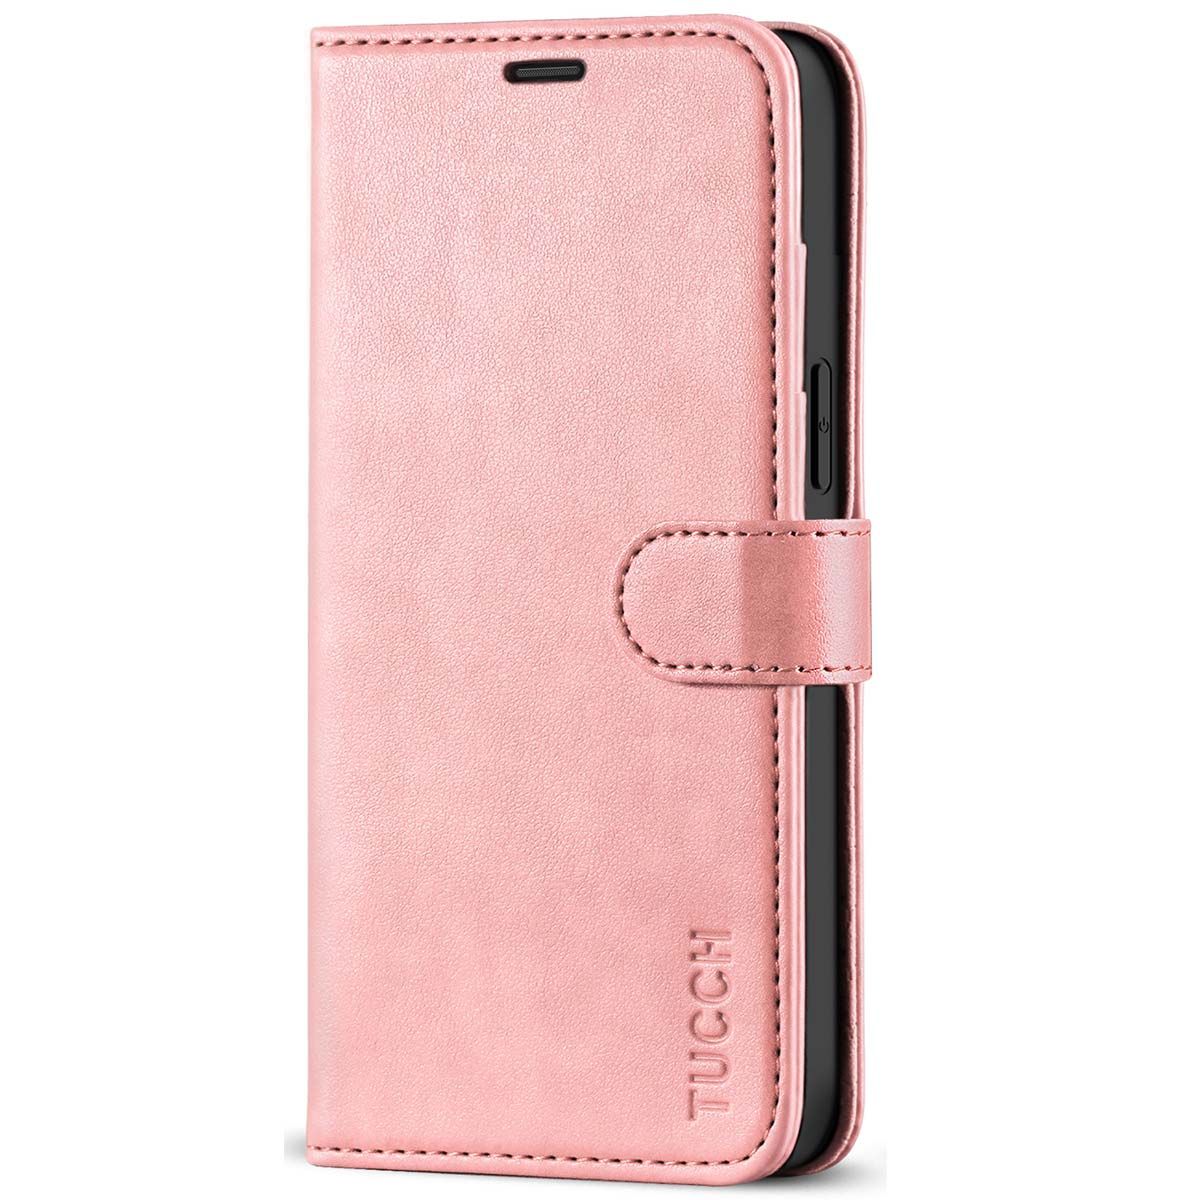 Kickstand Feature Card Slots Wrist Strap Note Pocket FYY Case Compatible with iPhone 12 Pro Max 5G 6.7, for iPhone 12 Pro Max 5G 6.7 Pink Luxury PU Leather Wallet Case Flip Folio Cover with 